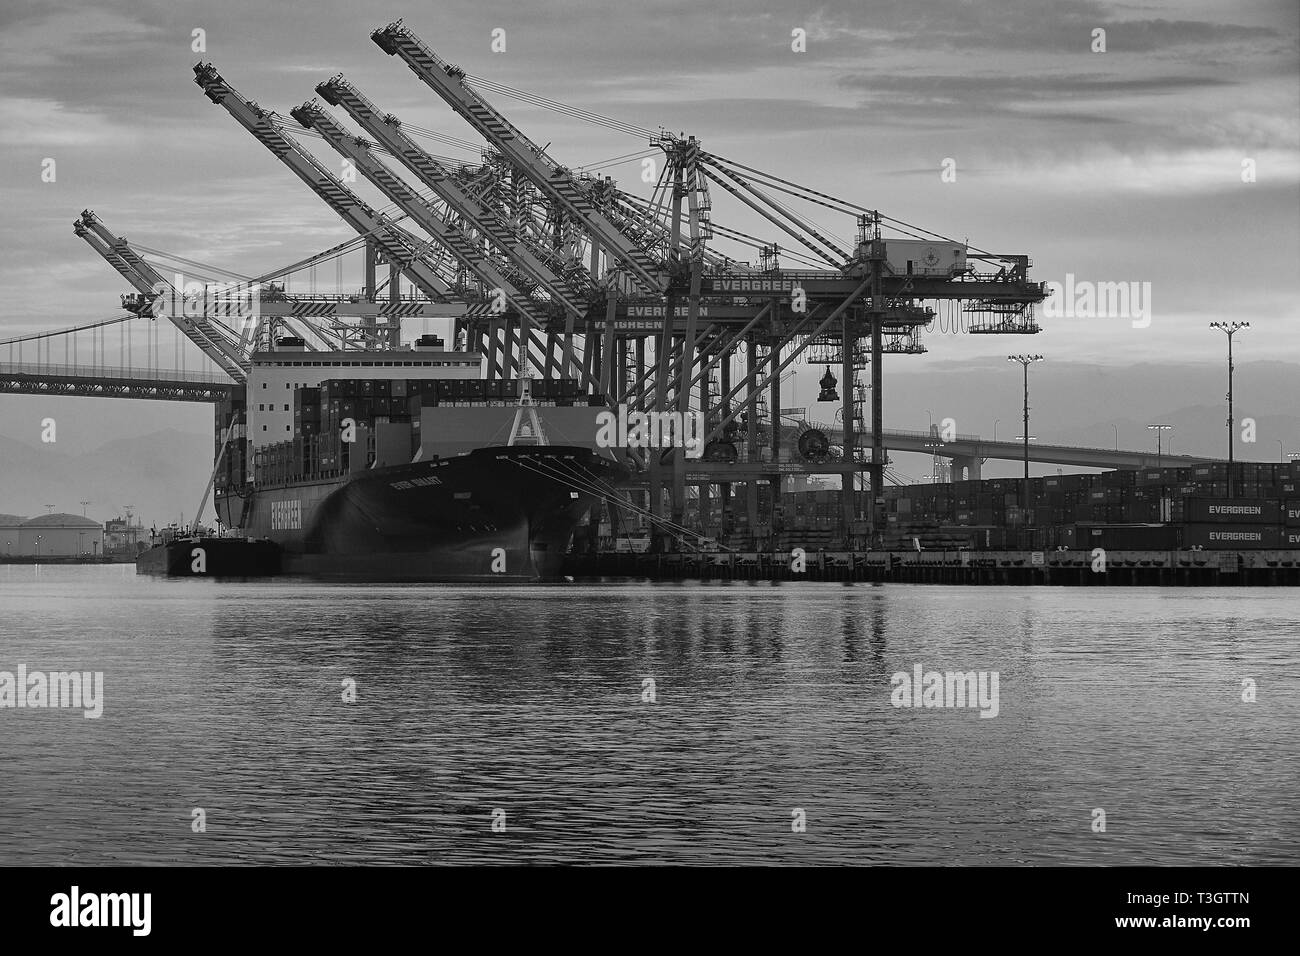 Black And White Photo Of Evergreen Container Ship, EVER SMART, Loading & Unloading In The Container Terminal At The Port of Los Angeles, California Stock Photo